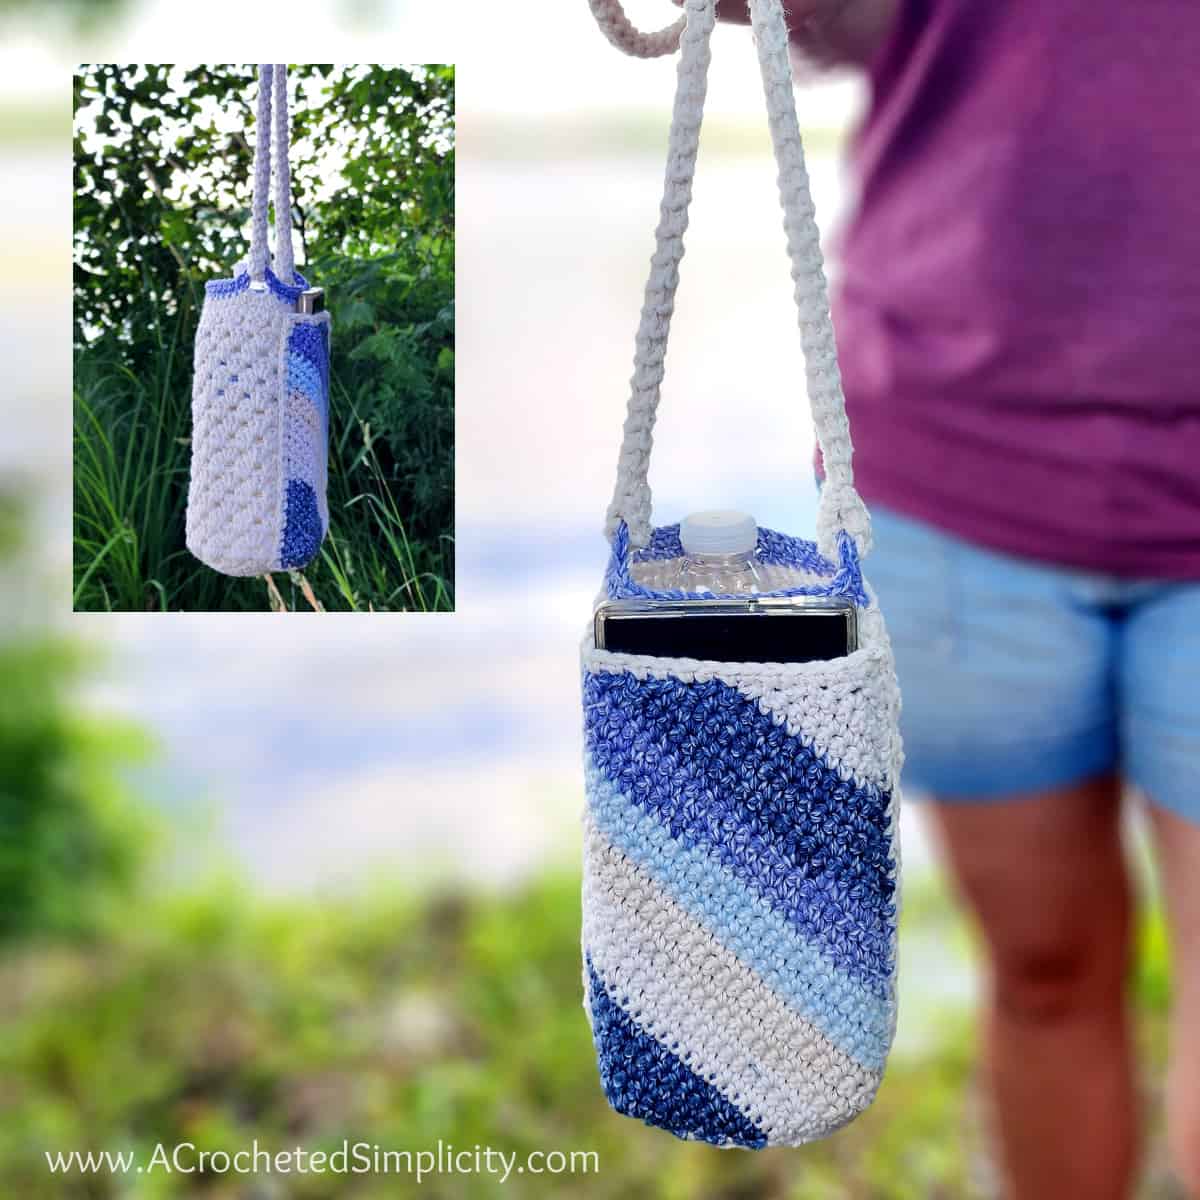 Photo within a photo showing the front and side view of a crochet water bottle holder with phone pocket.